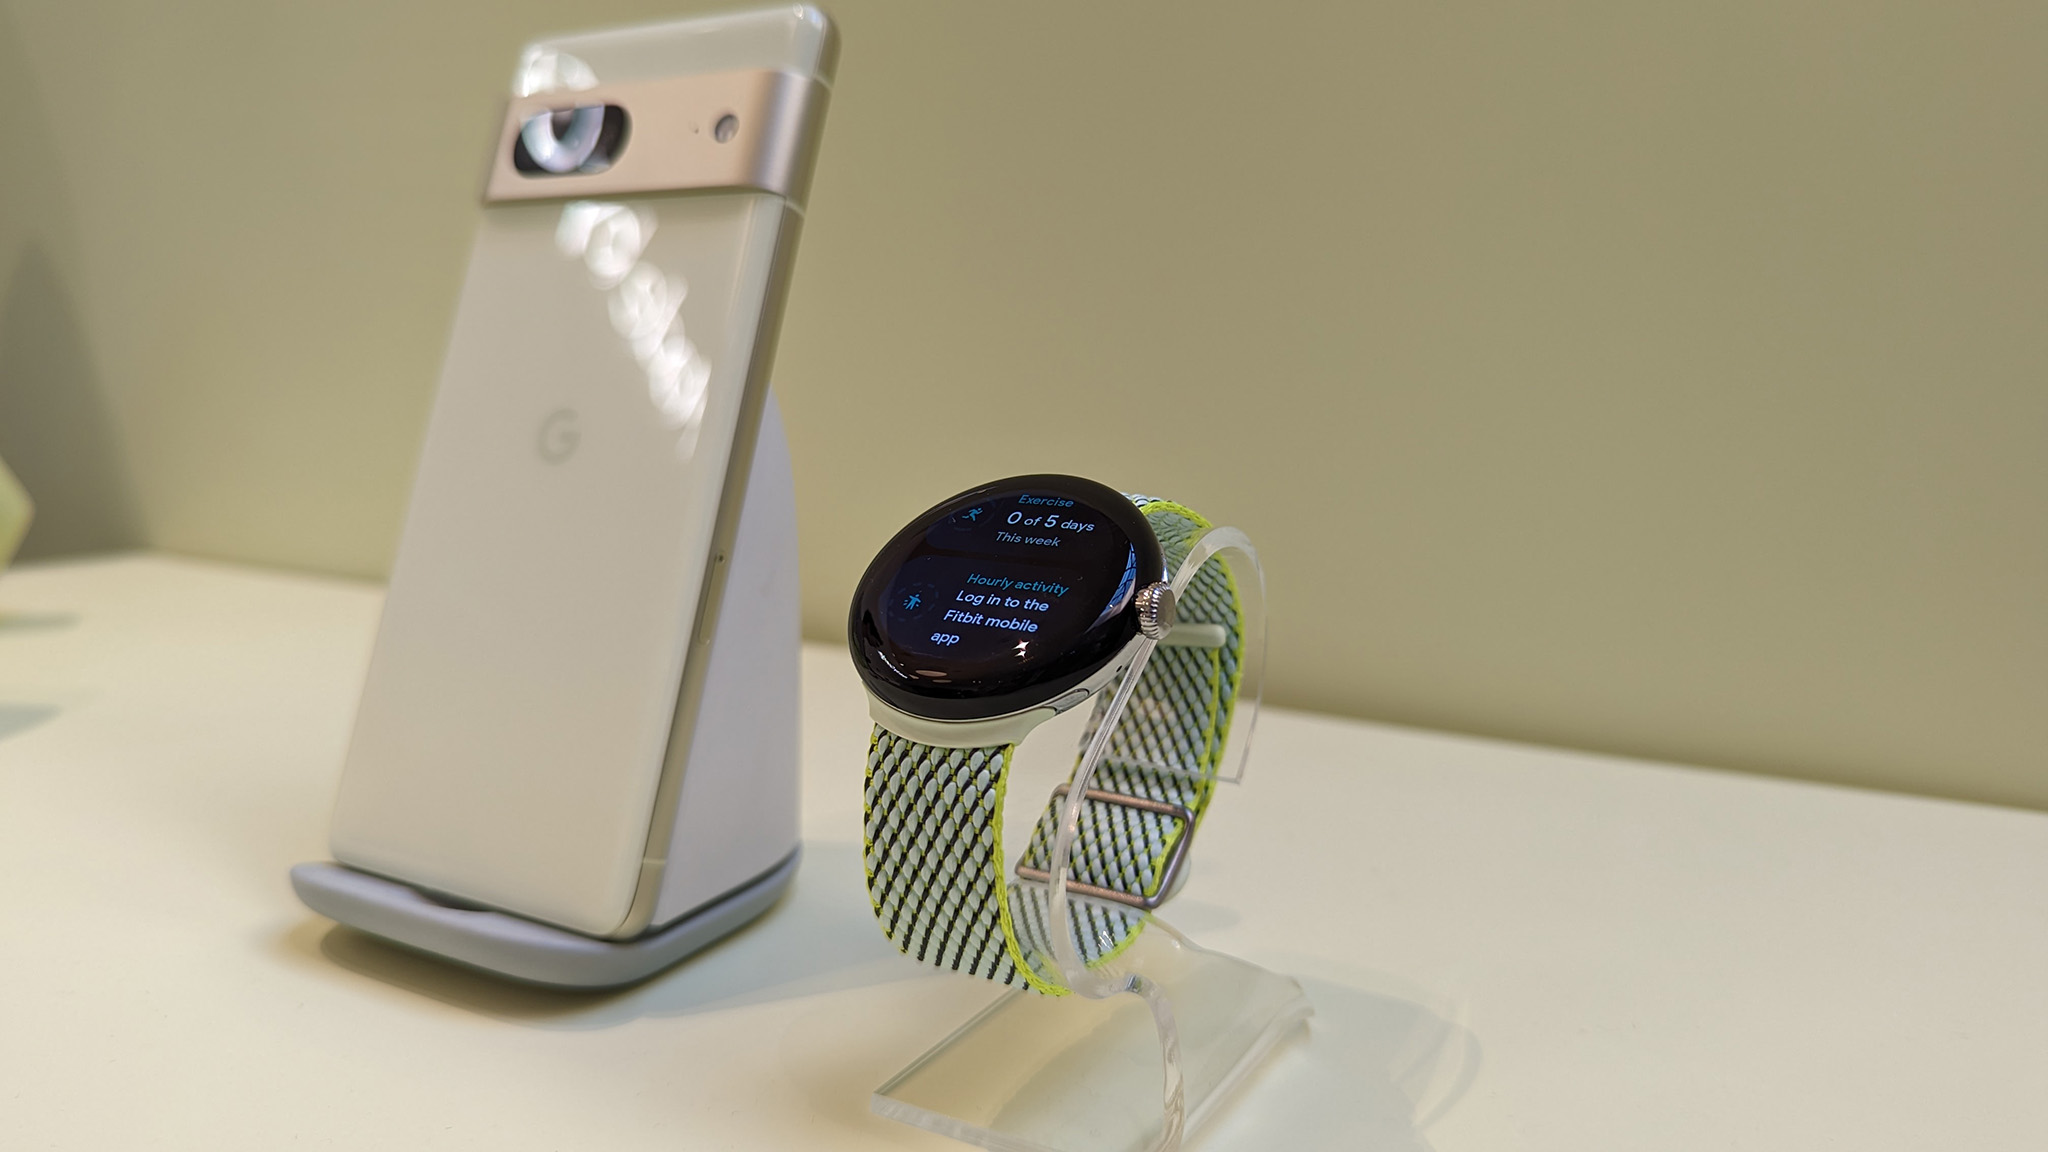 Taking a look at the Google Pixel 7 and Pixel Watch at Google's Fall 2022 event